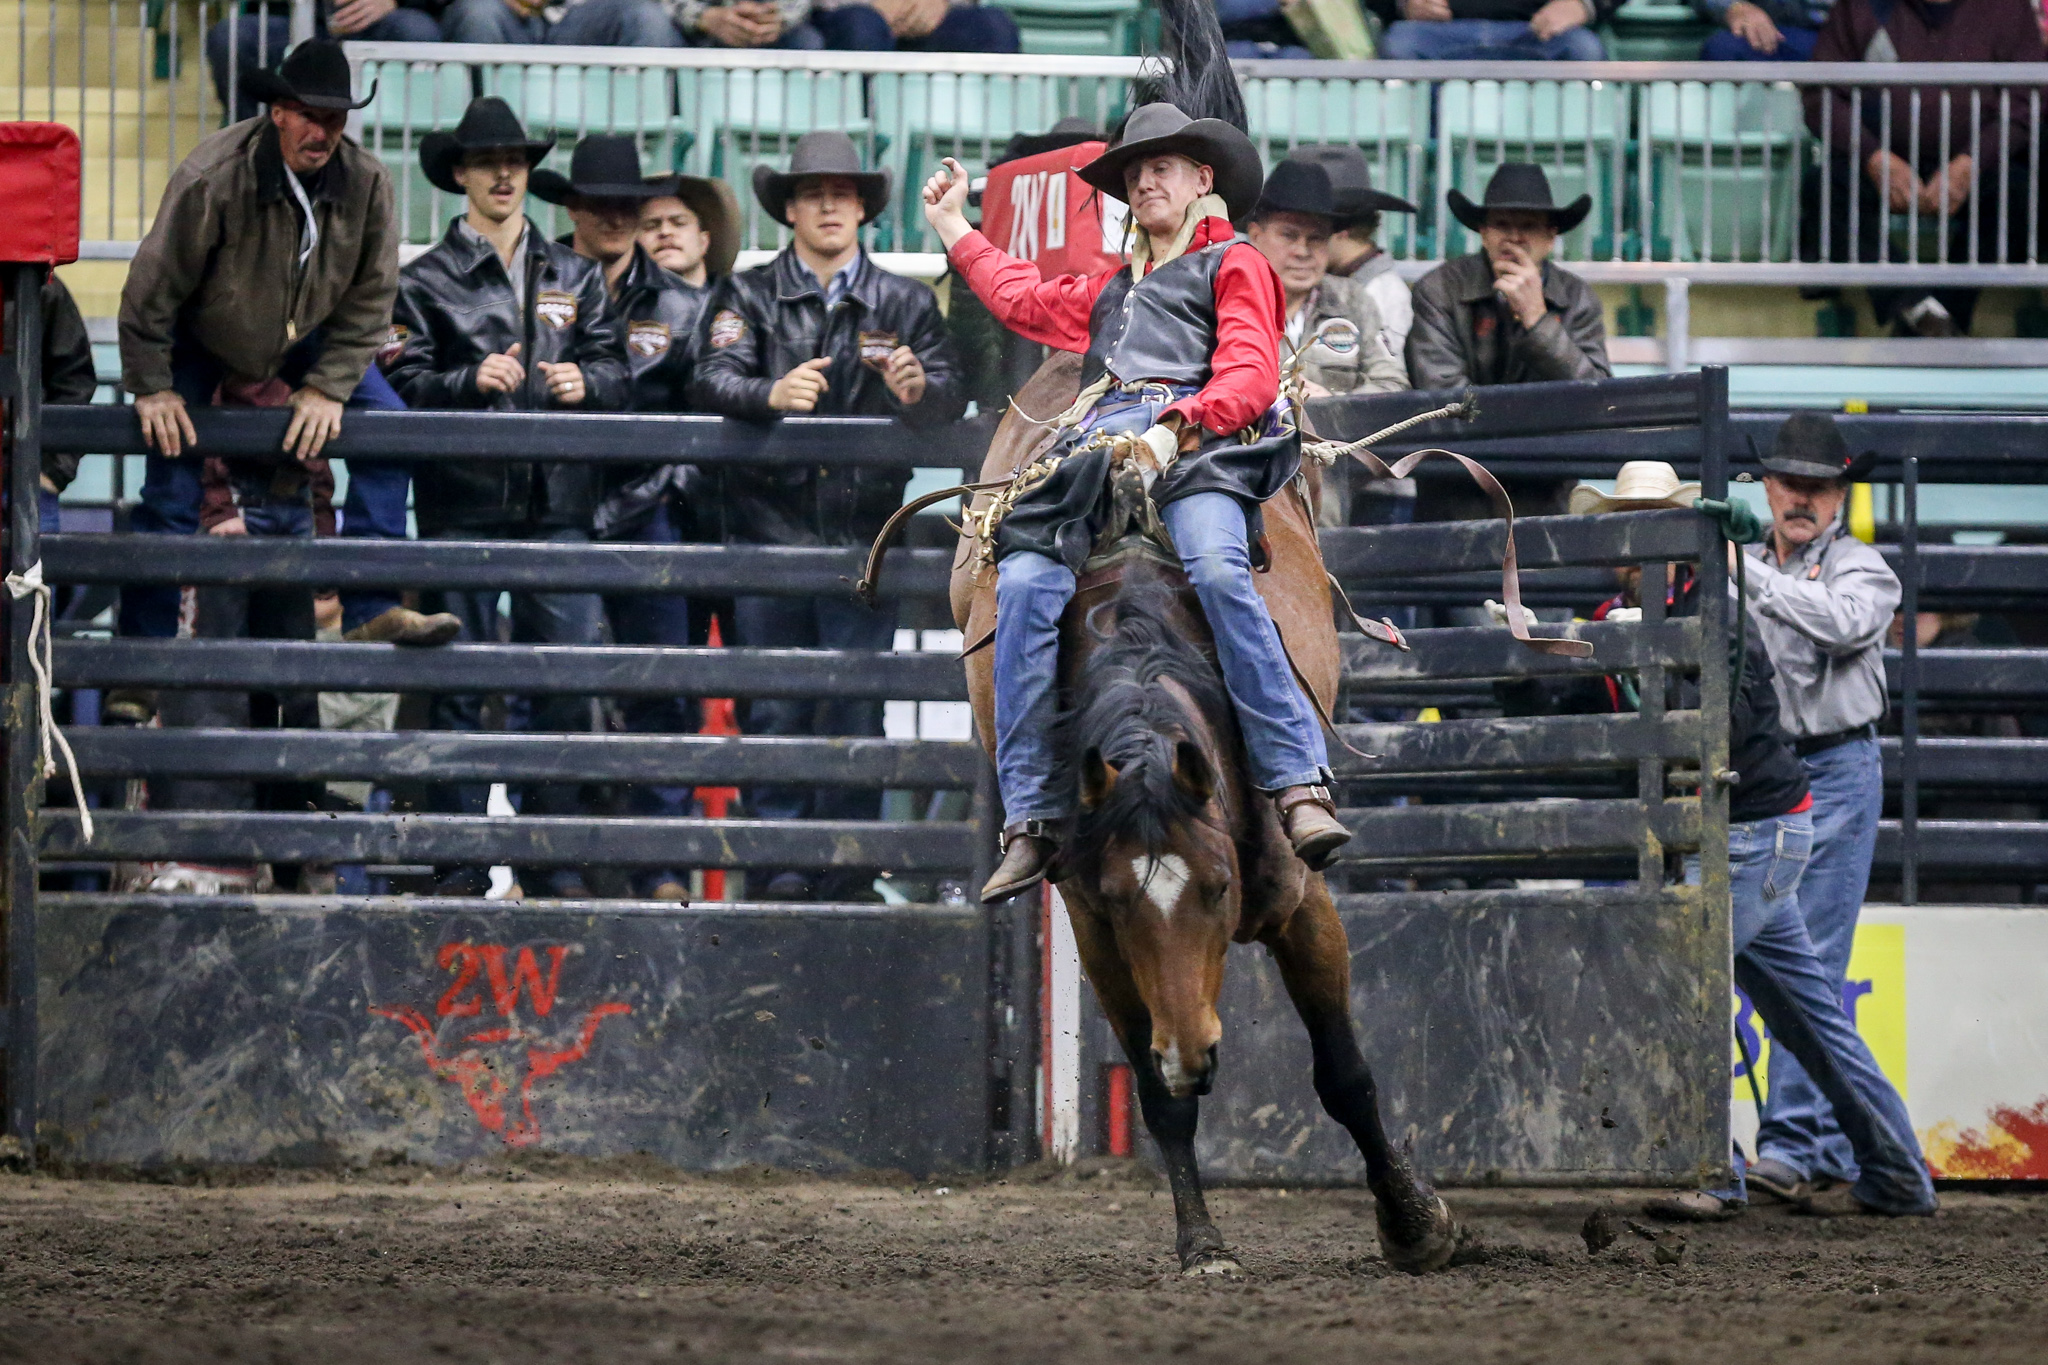 FirstEver Junior Finals Rodeo Rising Stars Event Debuts in Red Deer